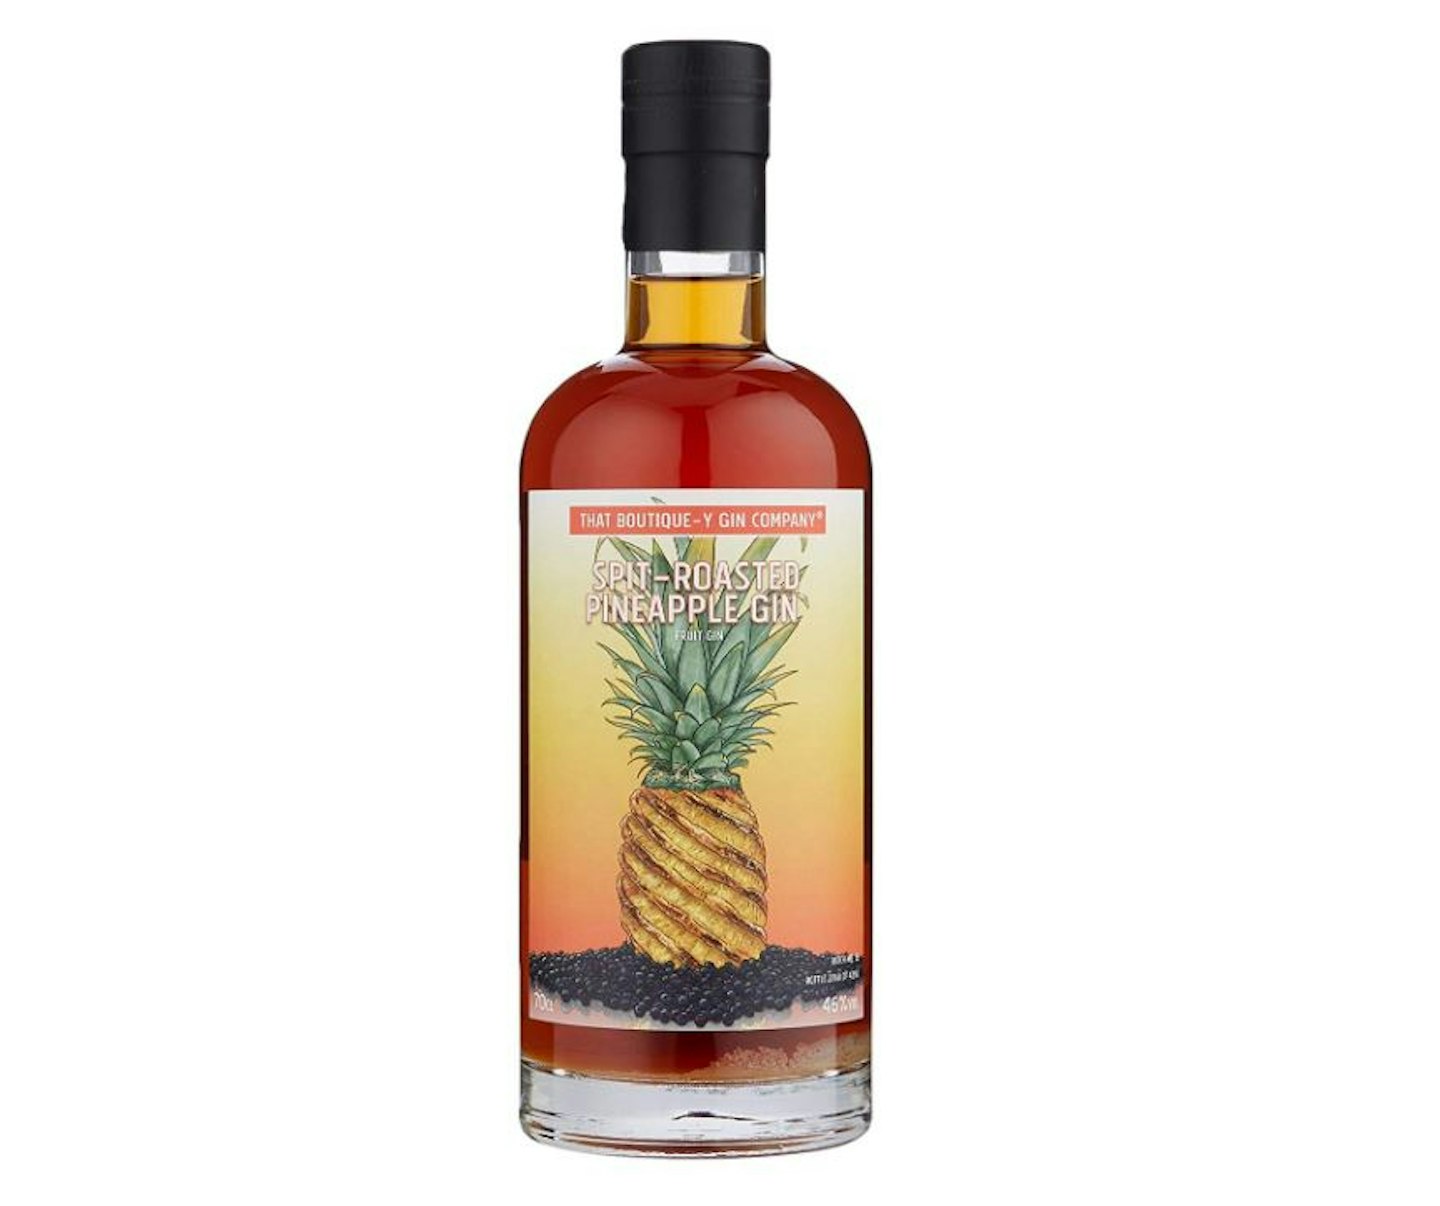 That Boutique-y Gin Company Spit-Roasted Pineapple Gin, 29.95